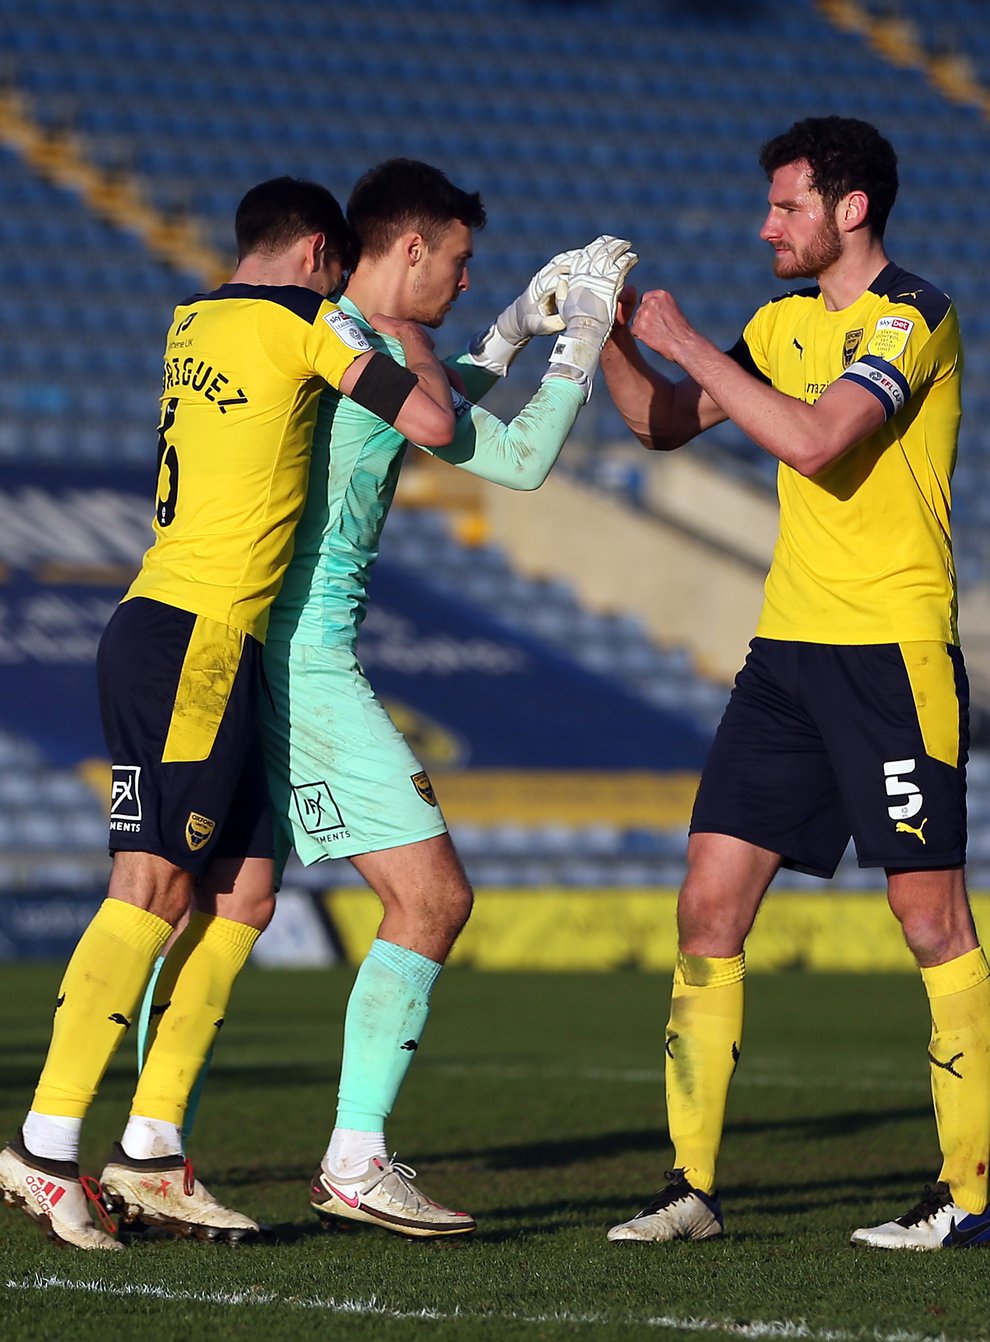 Jack Stevens Earns Point For Oxford With Stoppage Time Penalty Save Newschain